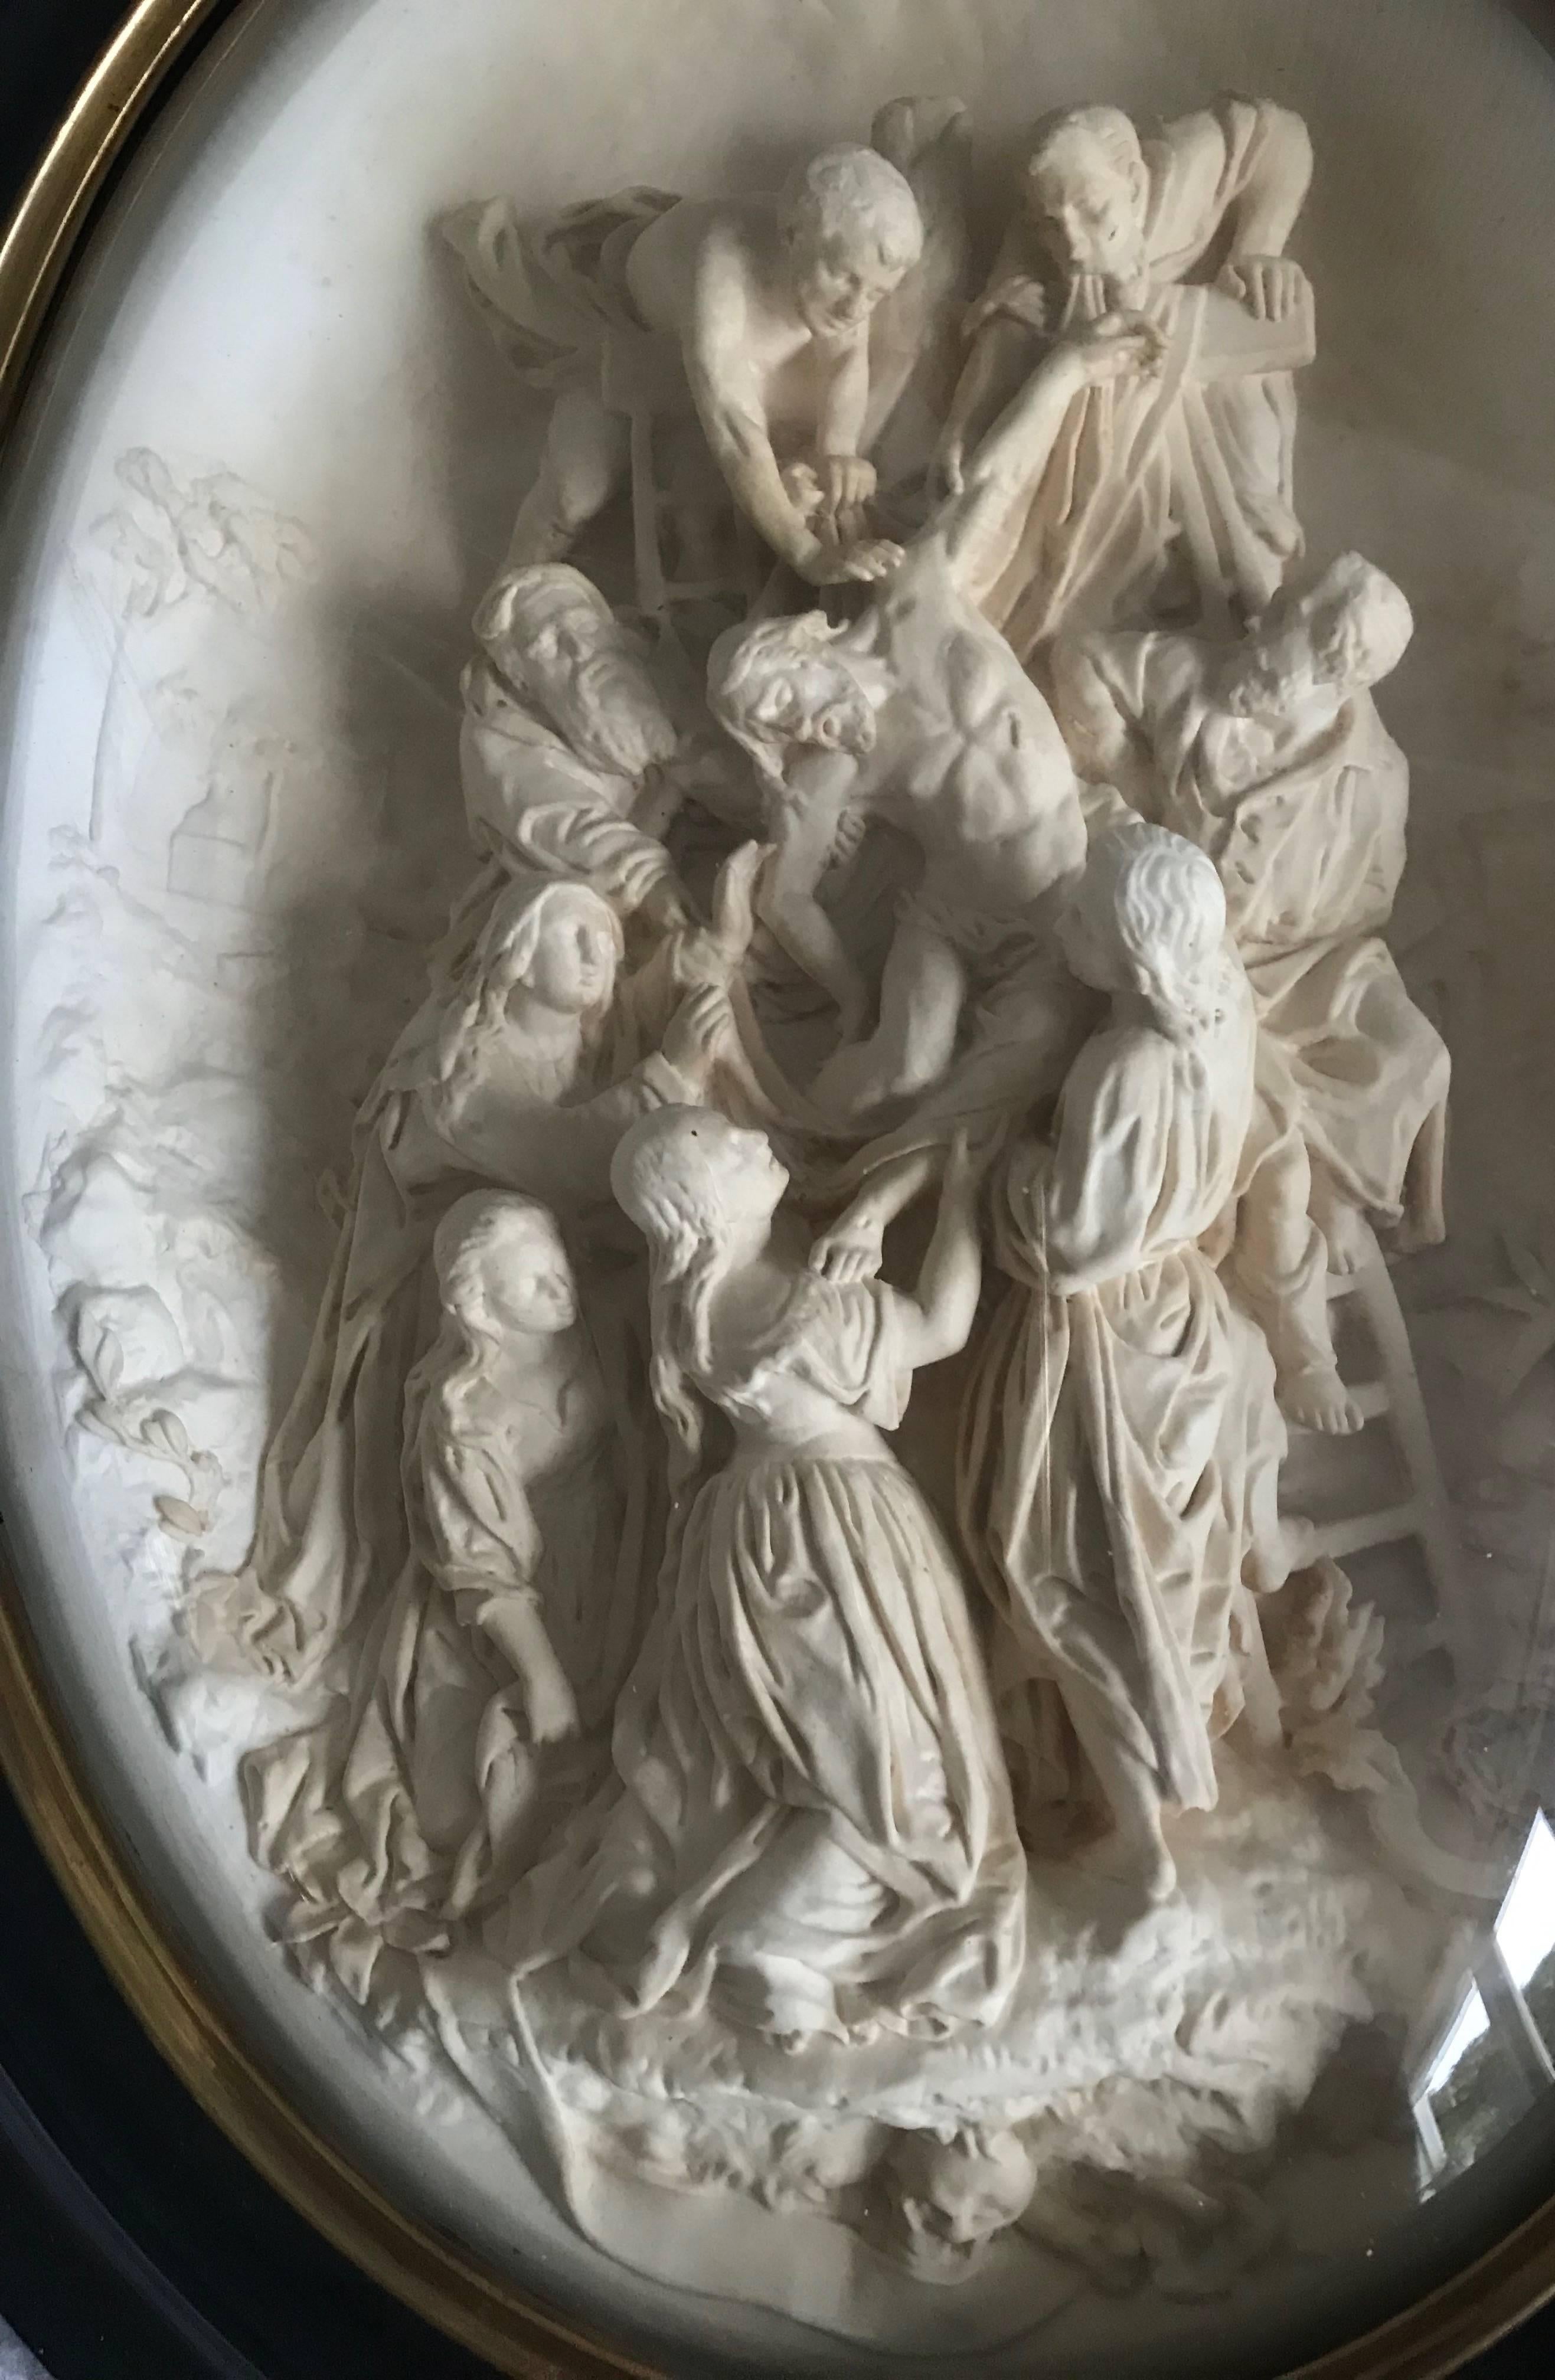 Beautiful quality-carved, work of Christian art.

This impressive sculpture out of sepiolite depicts the descent of the deceased Christ from his cross. Sepiolite is formed in burns on various coasts and it is a soft, white clay mineral. The tender